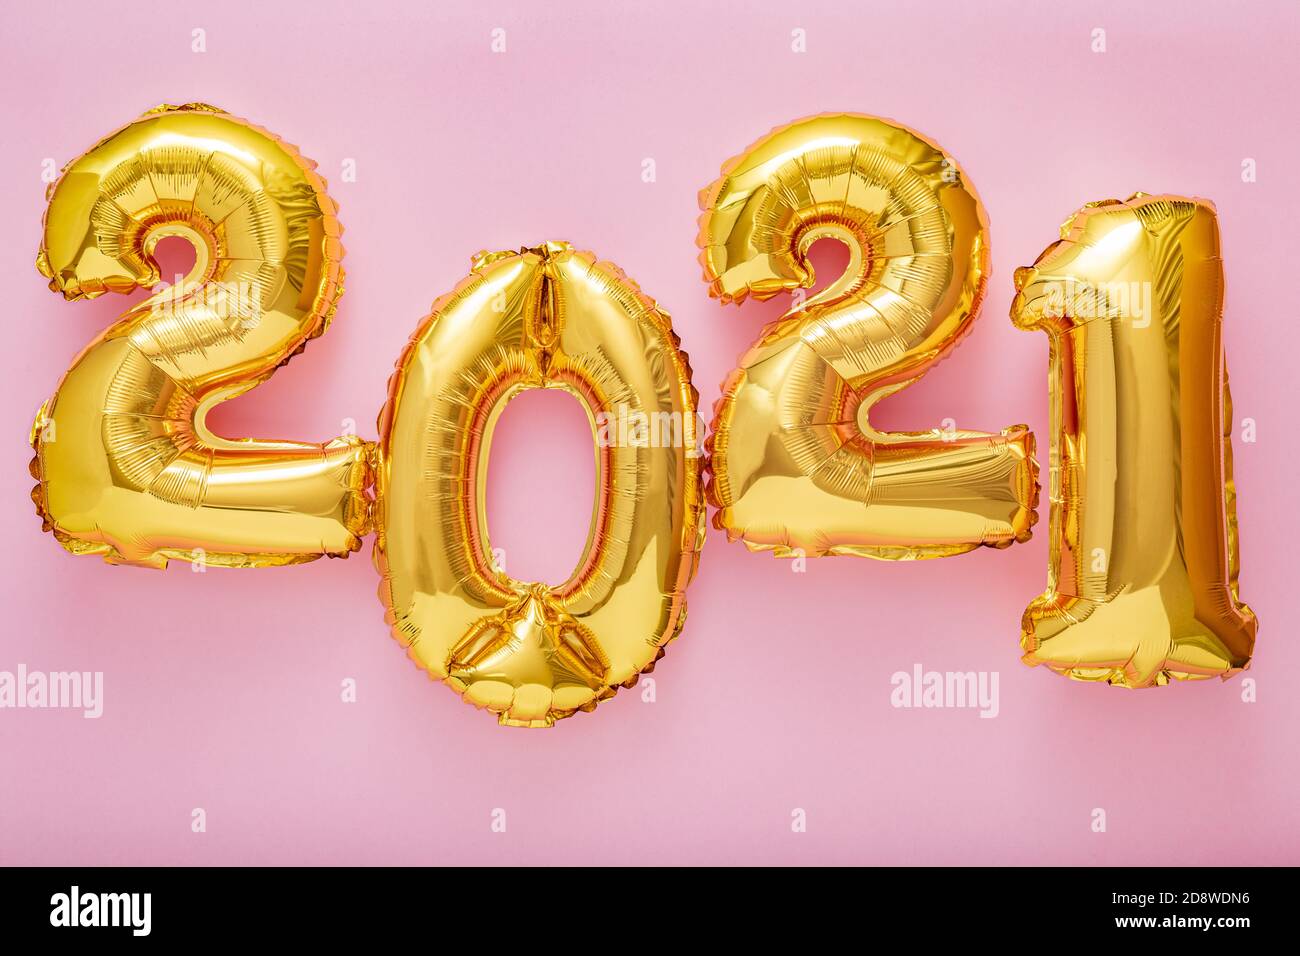 2021 balloon text on pink background. Happy New year eve invitation with Christmas gold foil balloons 2021. Flat lay long web banner Stock Photo